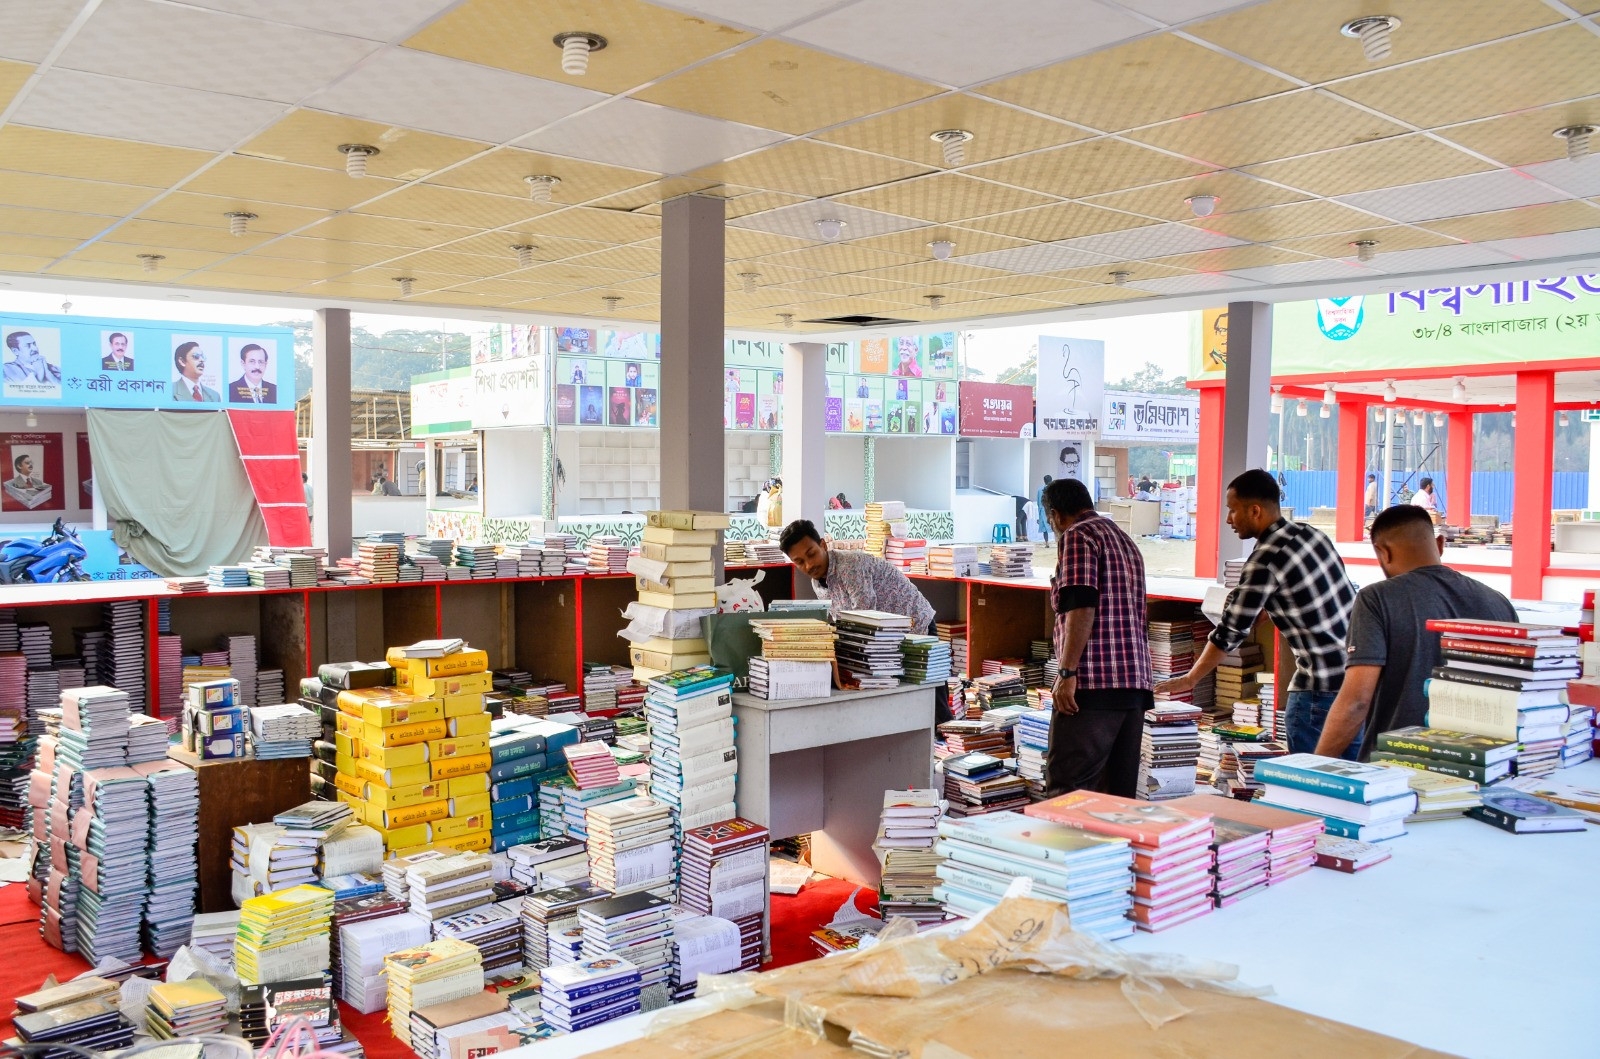 The stalls are getting ready for book lovers. Prime Minister Sheikh Hasina is set to inaugurate ‘Amar Ekushey Grantha Mela’ today on the Bangla Academy premises. Photo Muktadir Mokto